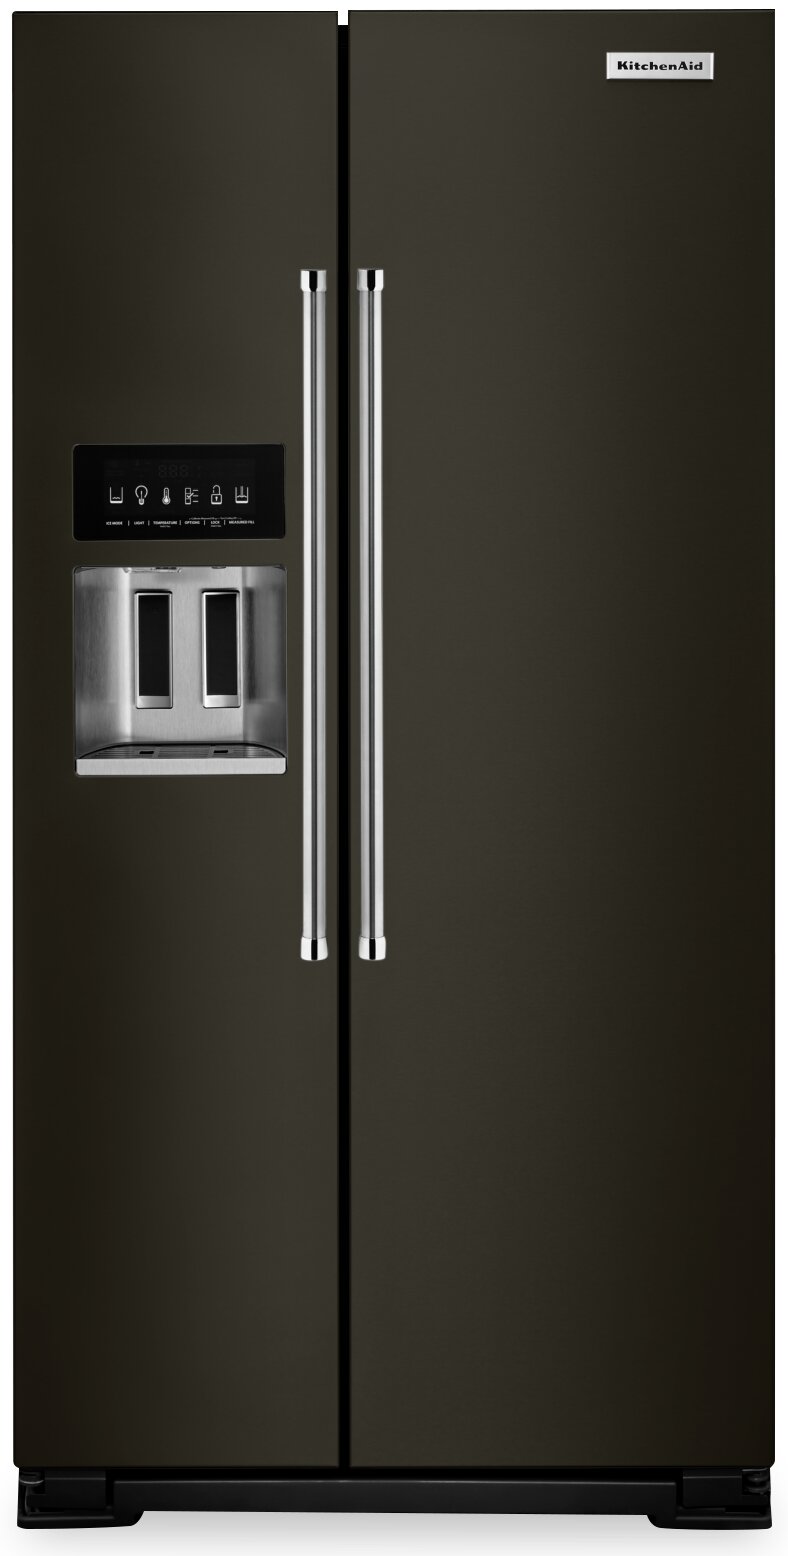 KitchenAid 24.8 Cu. Ft. Side-by-Side Refrigerator - KRSF705HBS - Refrigerator in Black Stainless Steel with PrintShield Finish